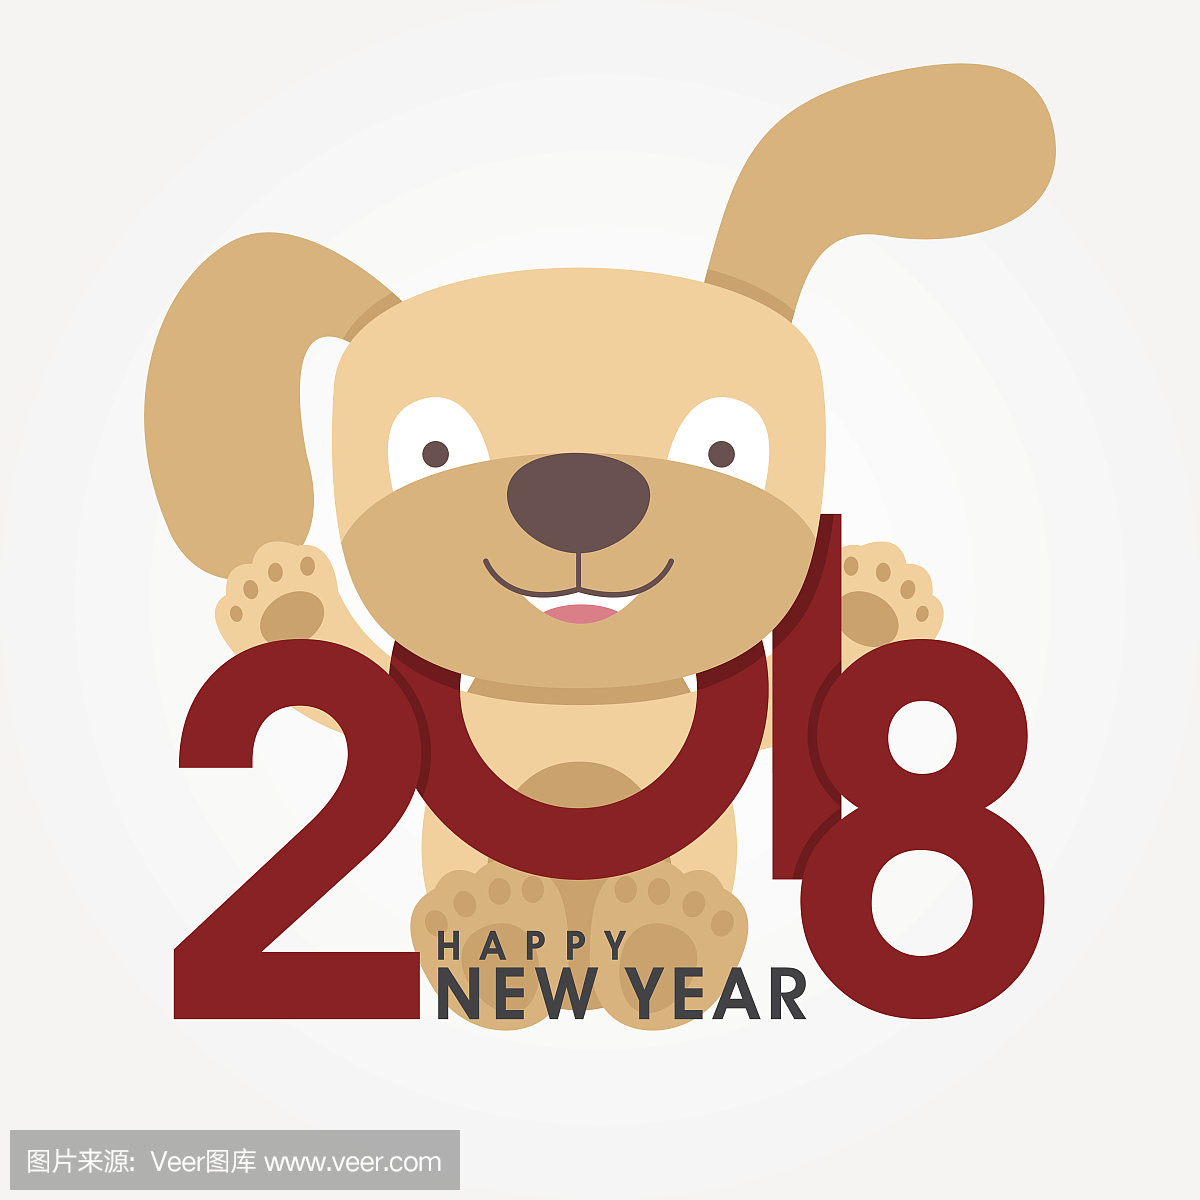 Happy 2018 New Year greeting card. Chinese 